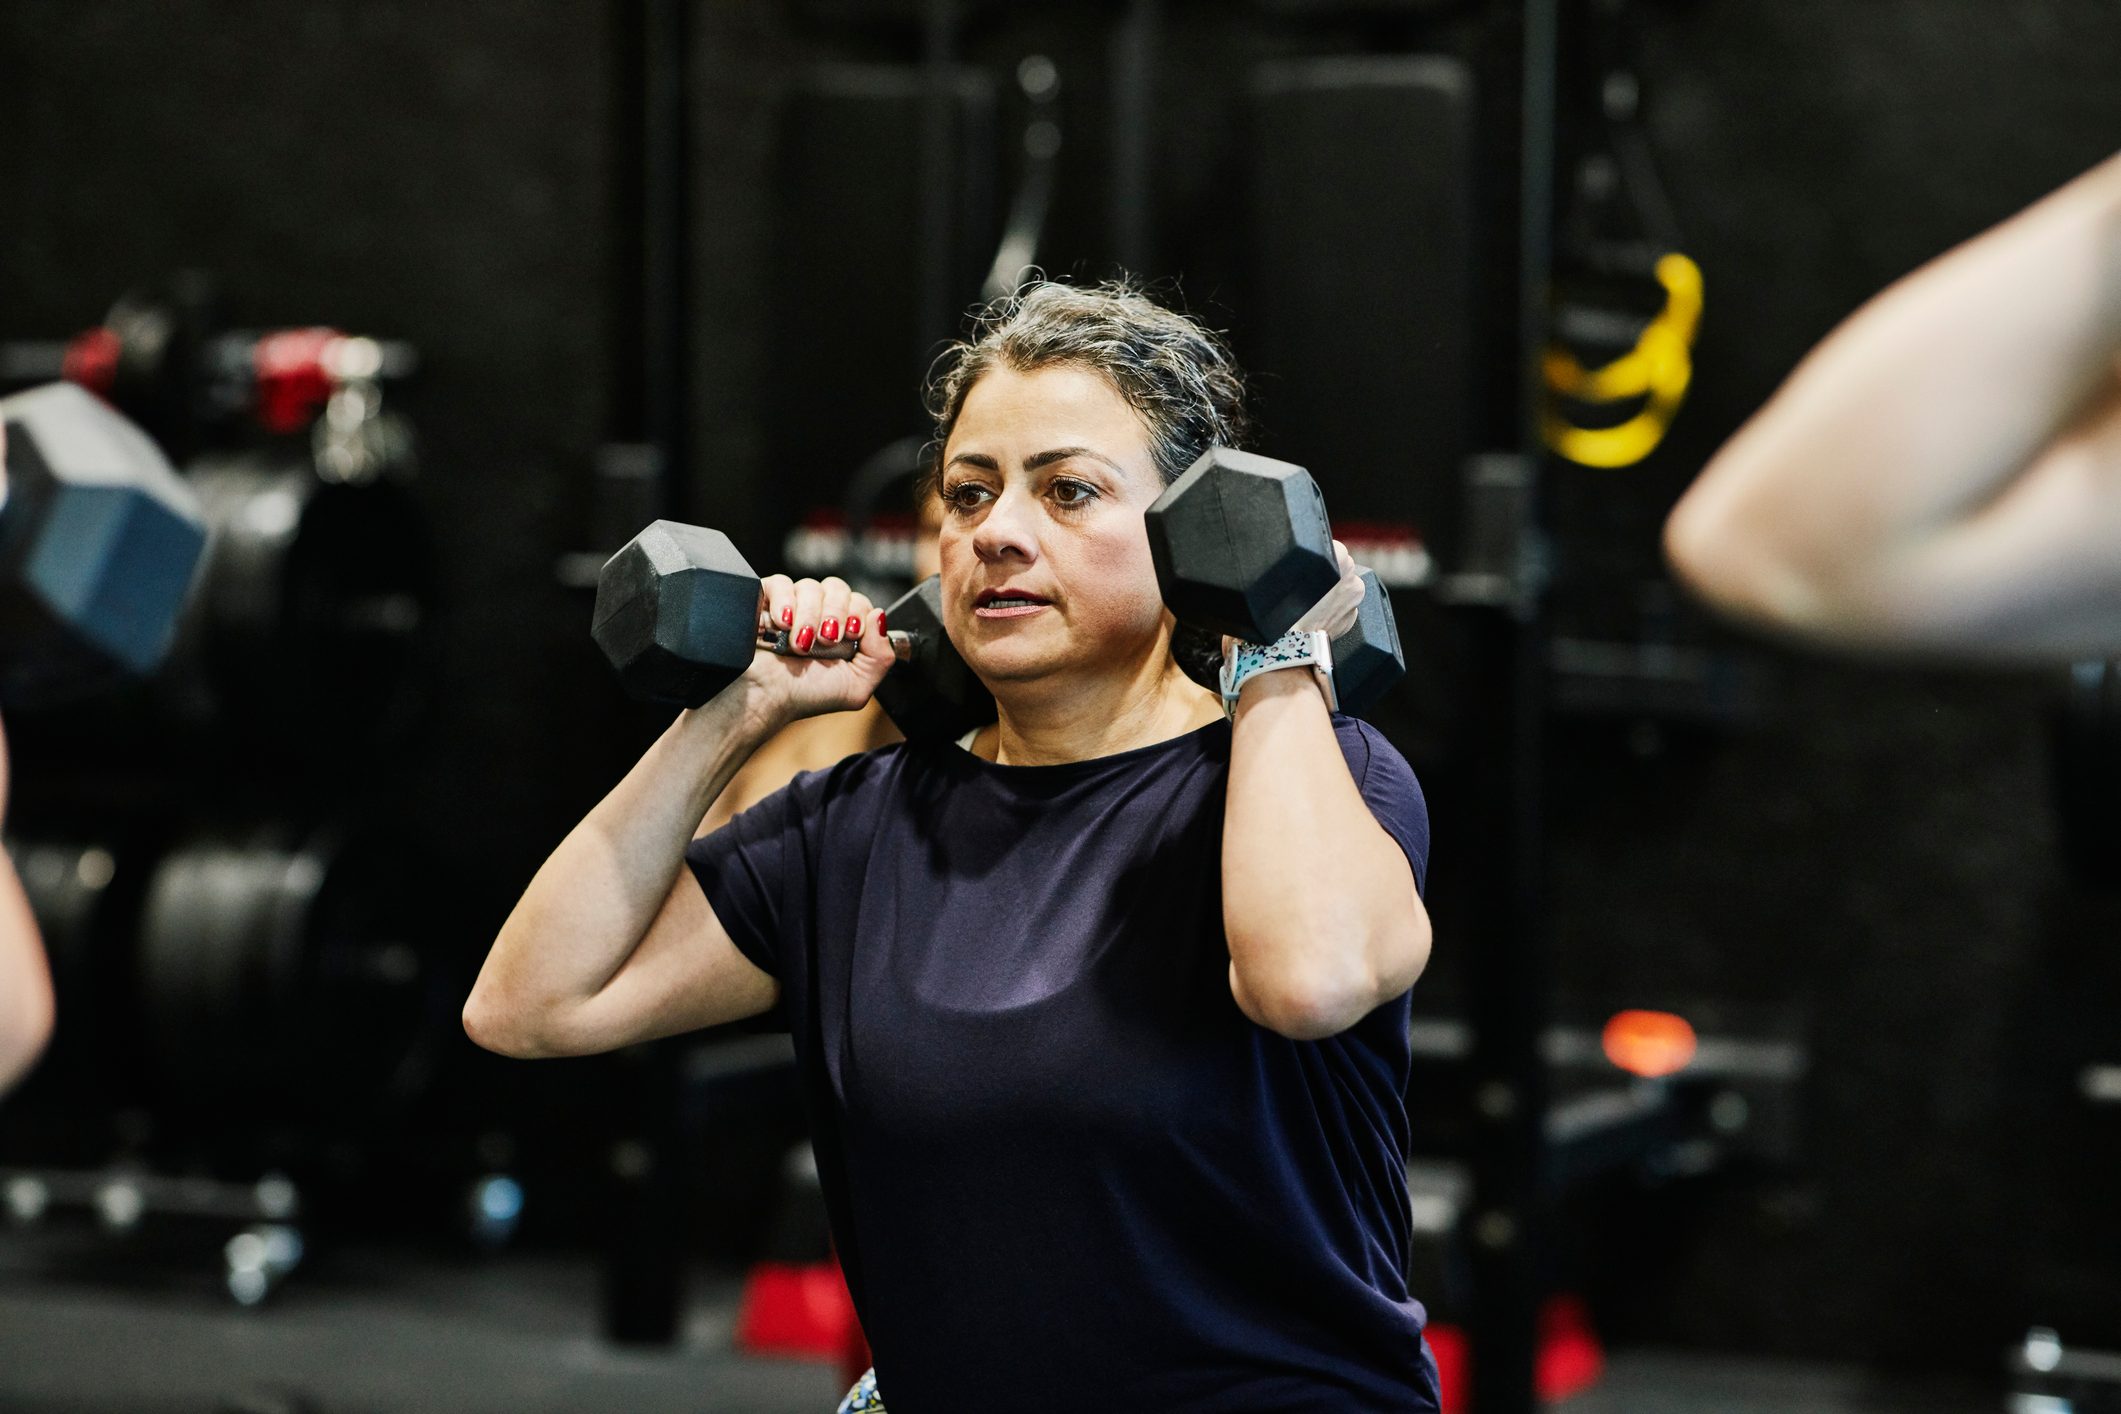 Woman doing dumbbell squats during fitness class in gym